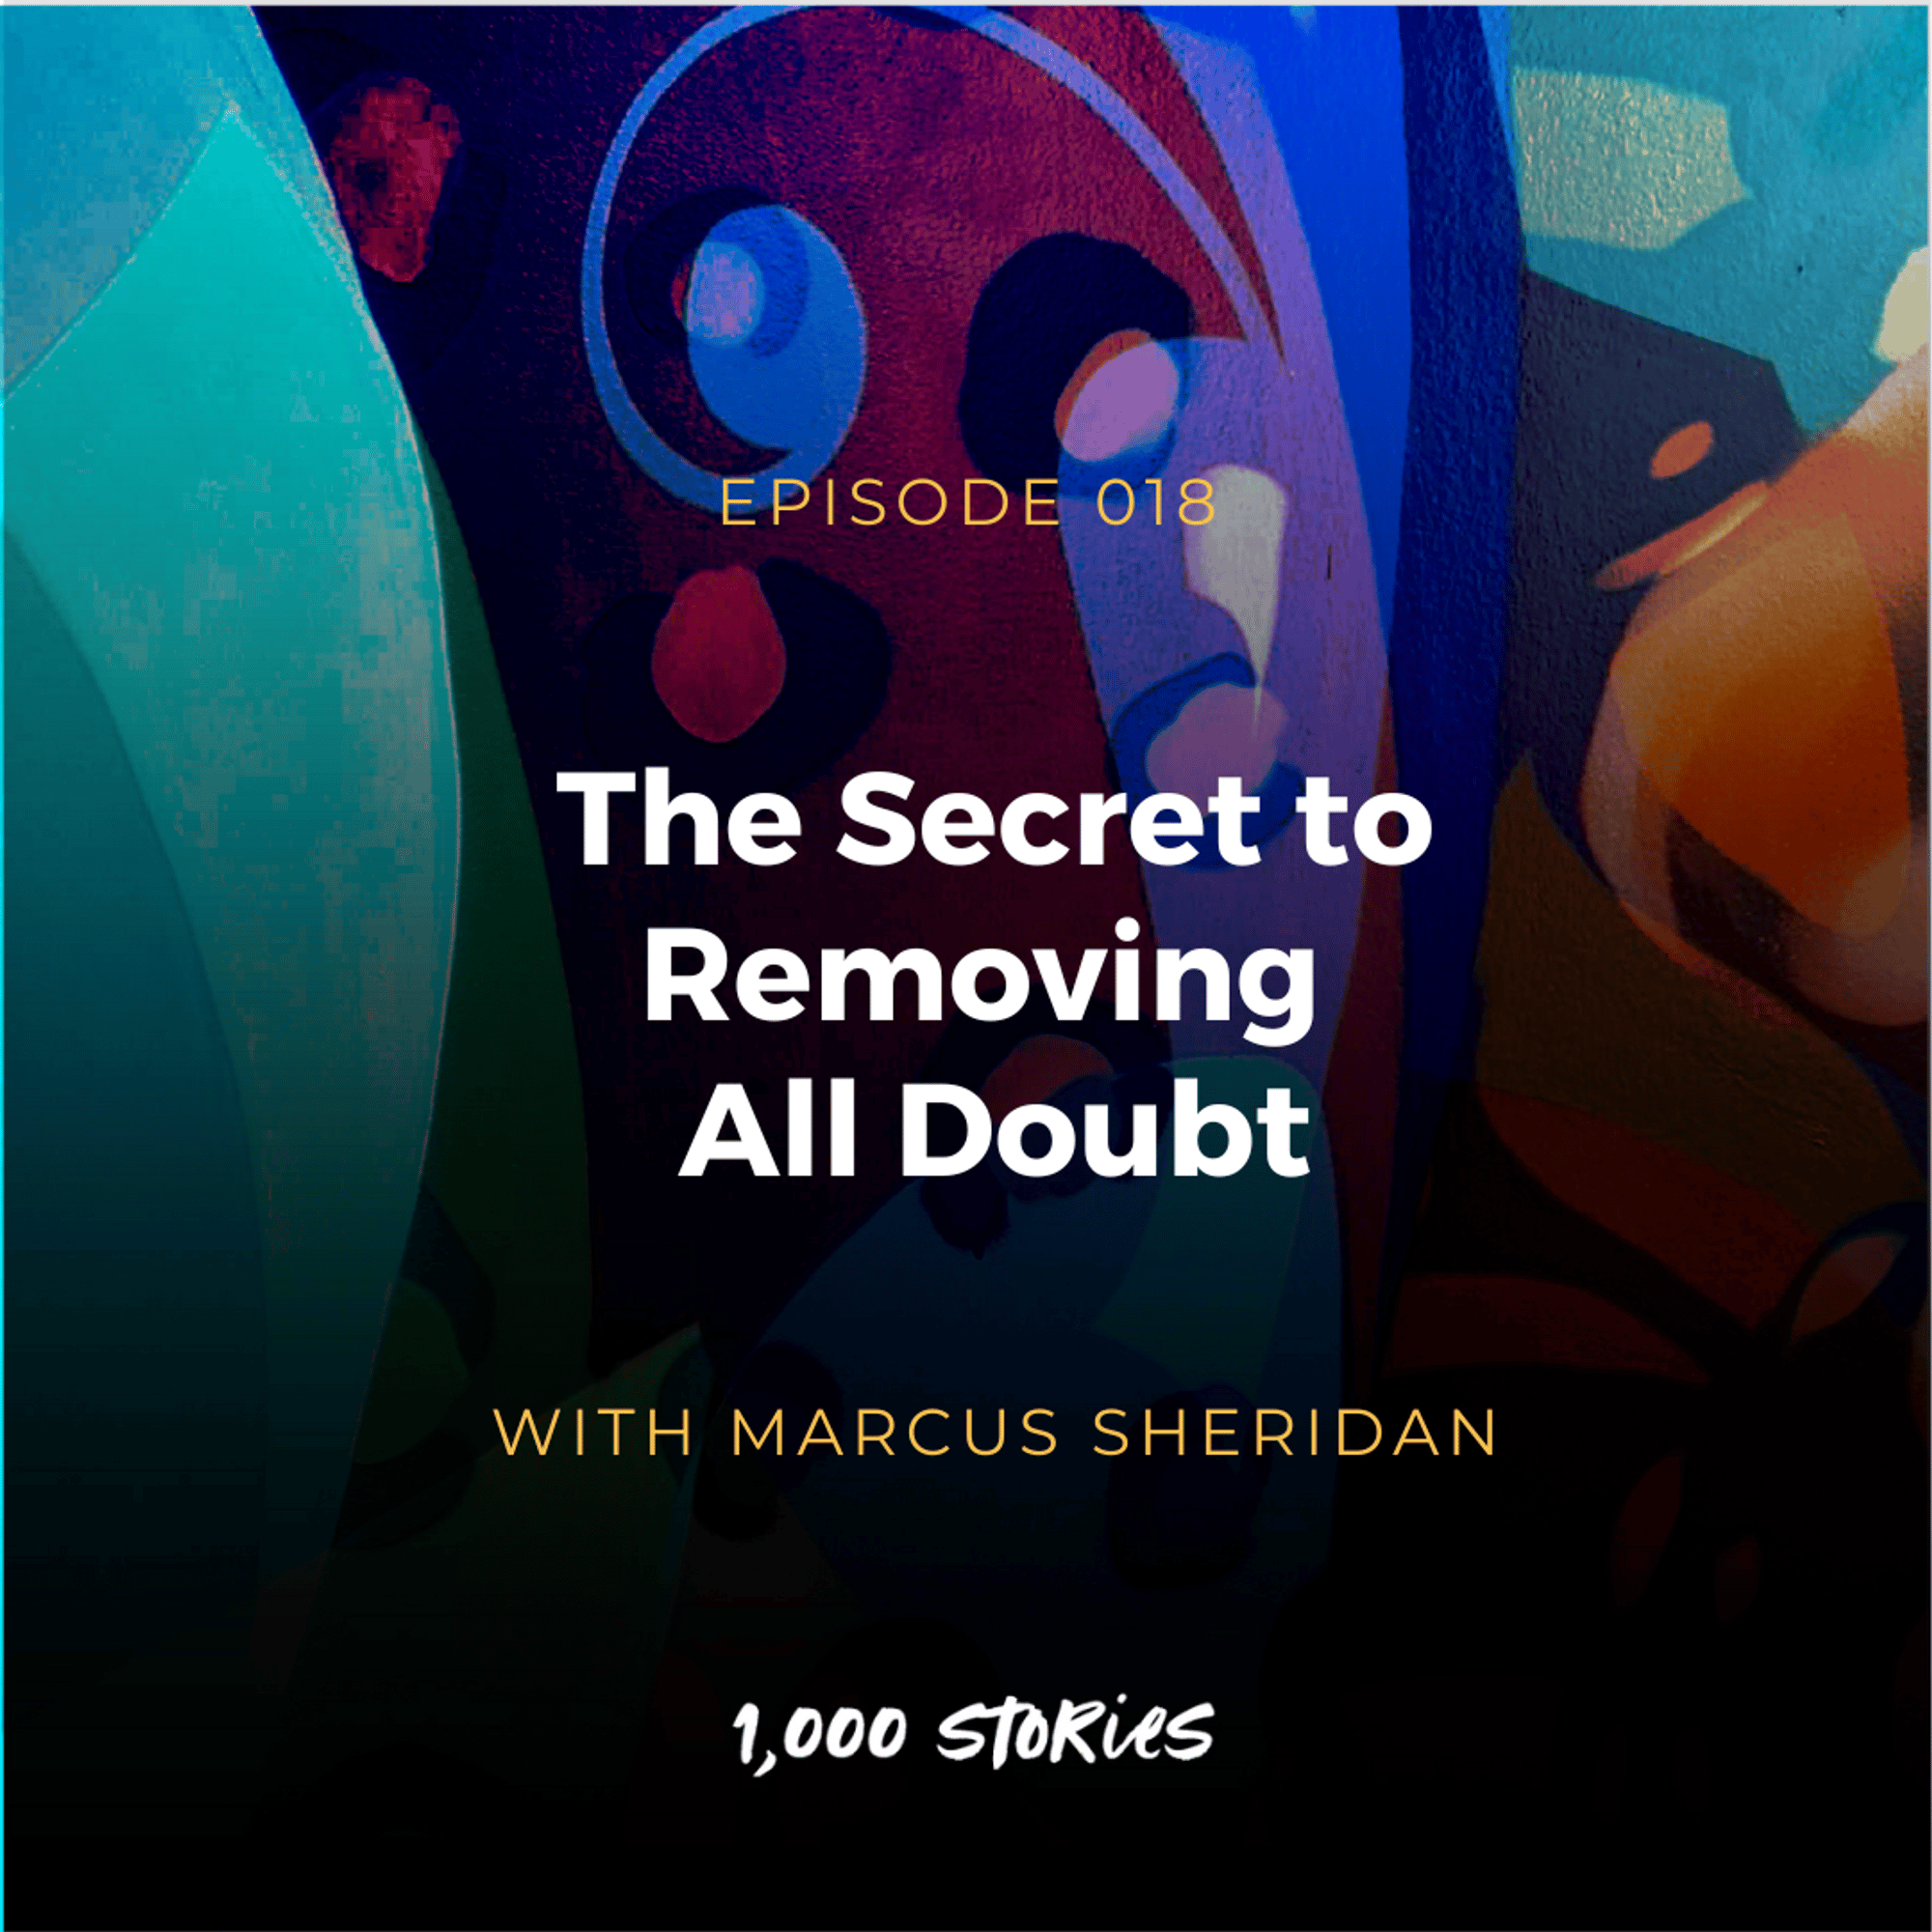 The Secret to Removing All Doubt with Marcus Sheridan